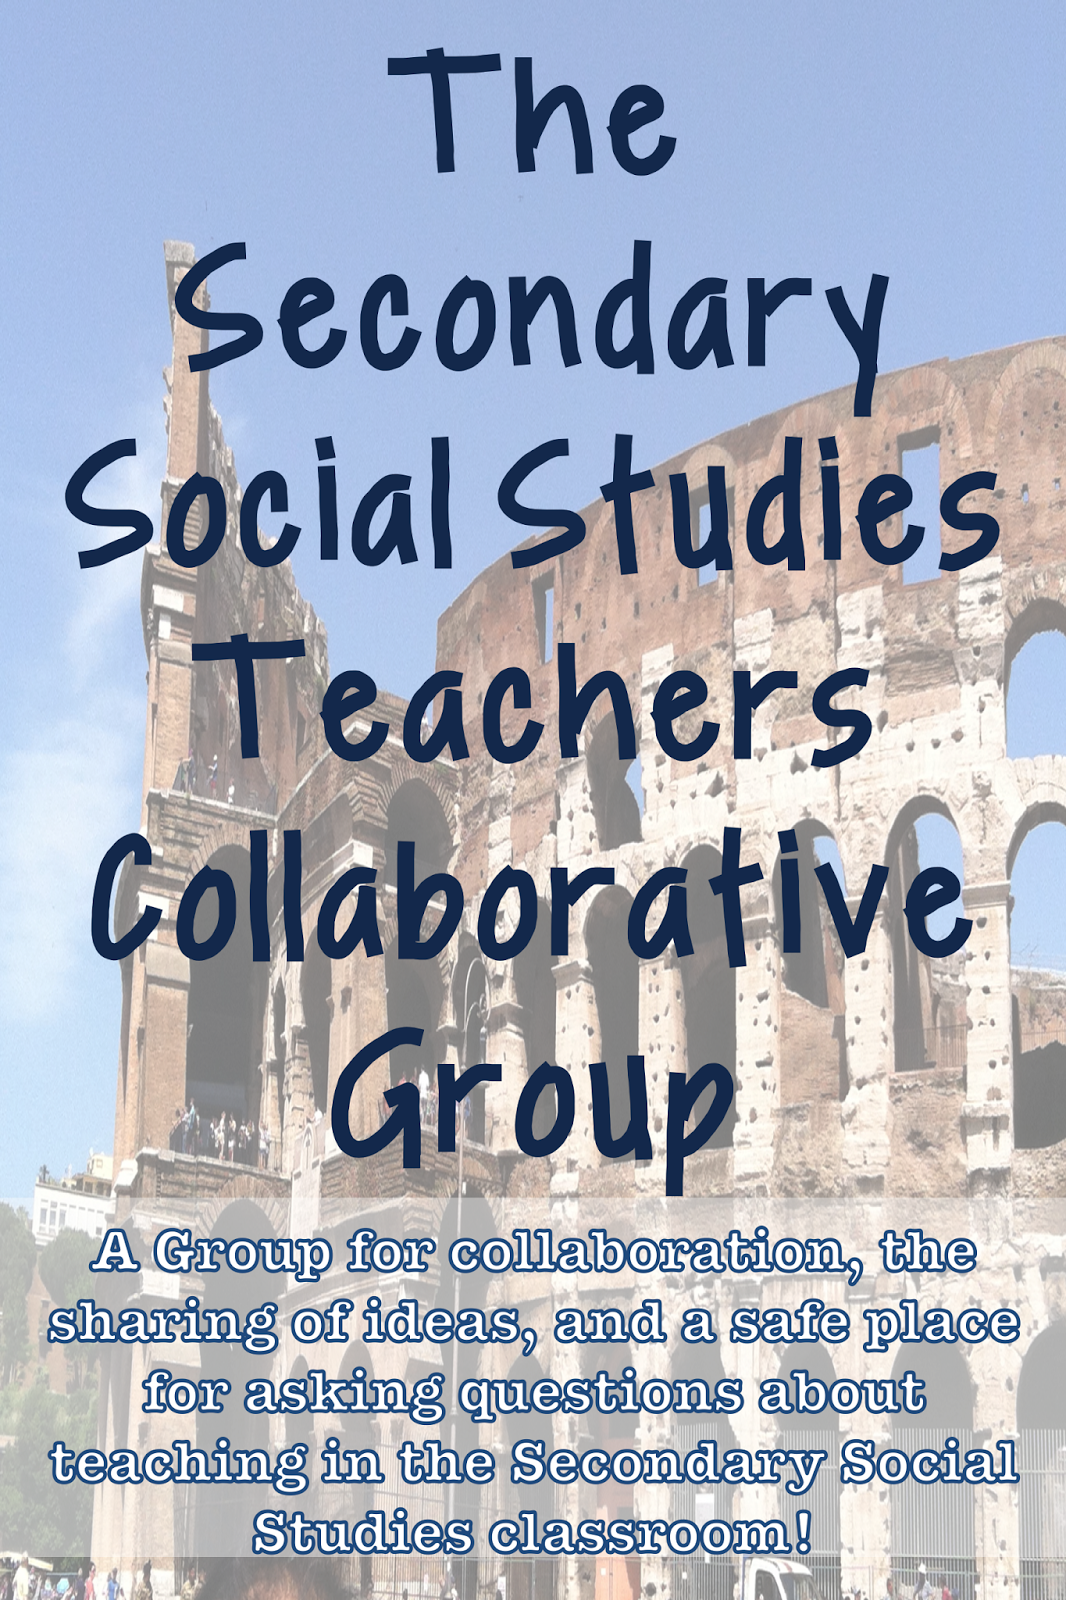 Join The Secondary Social Studies Teachers Collaborative Group on Facebook to have a safe place for sharing ideas, asking questions, and keeping up-to-date on the latest and greatest social studies resources!